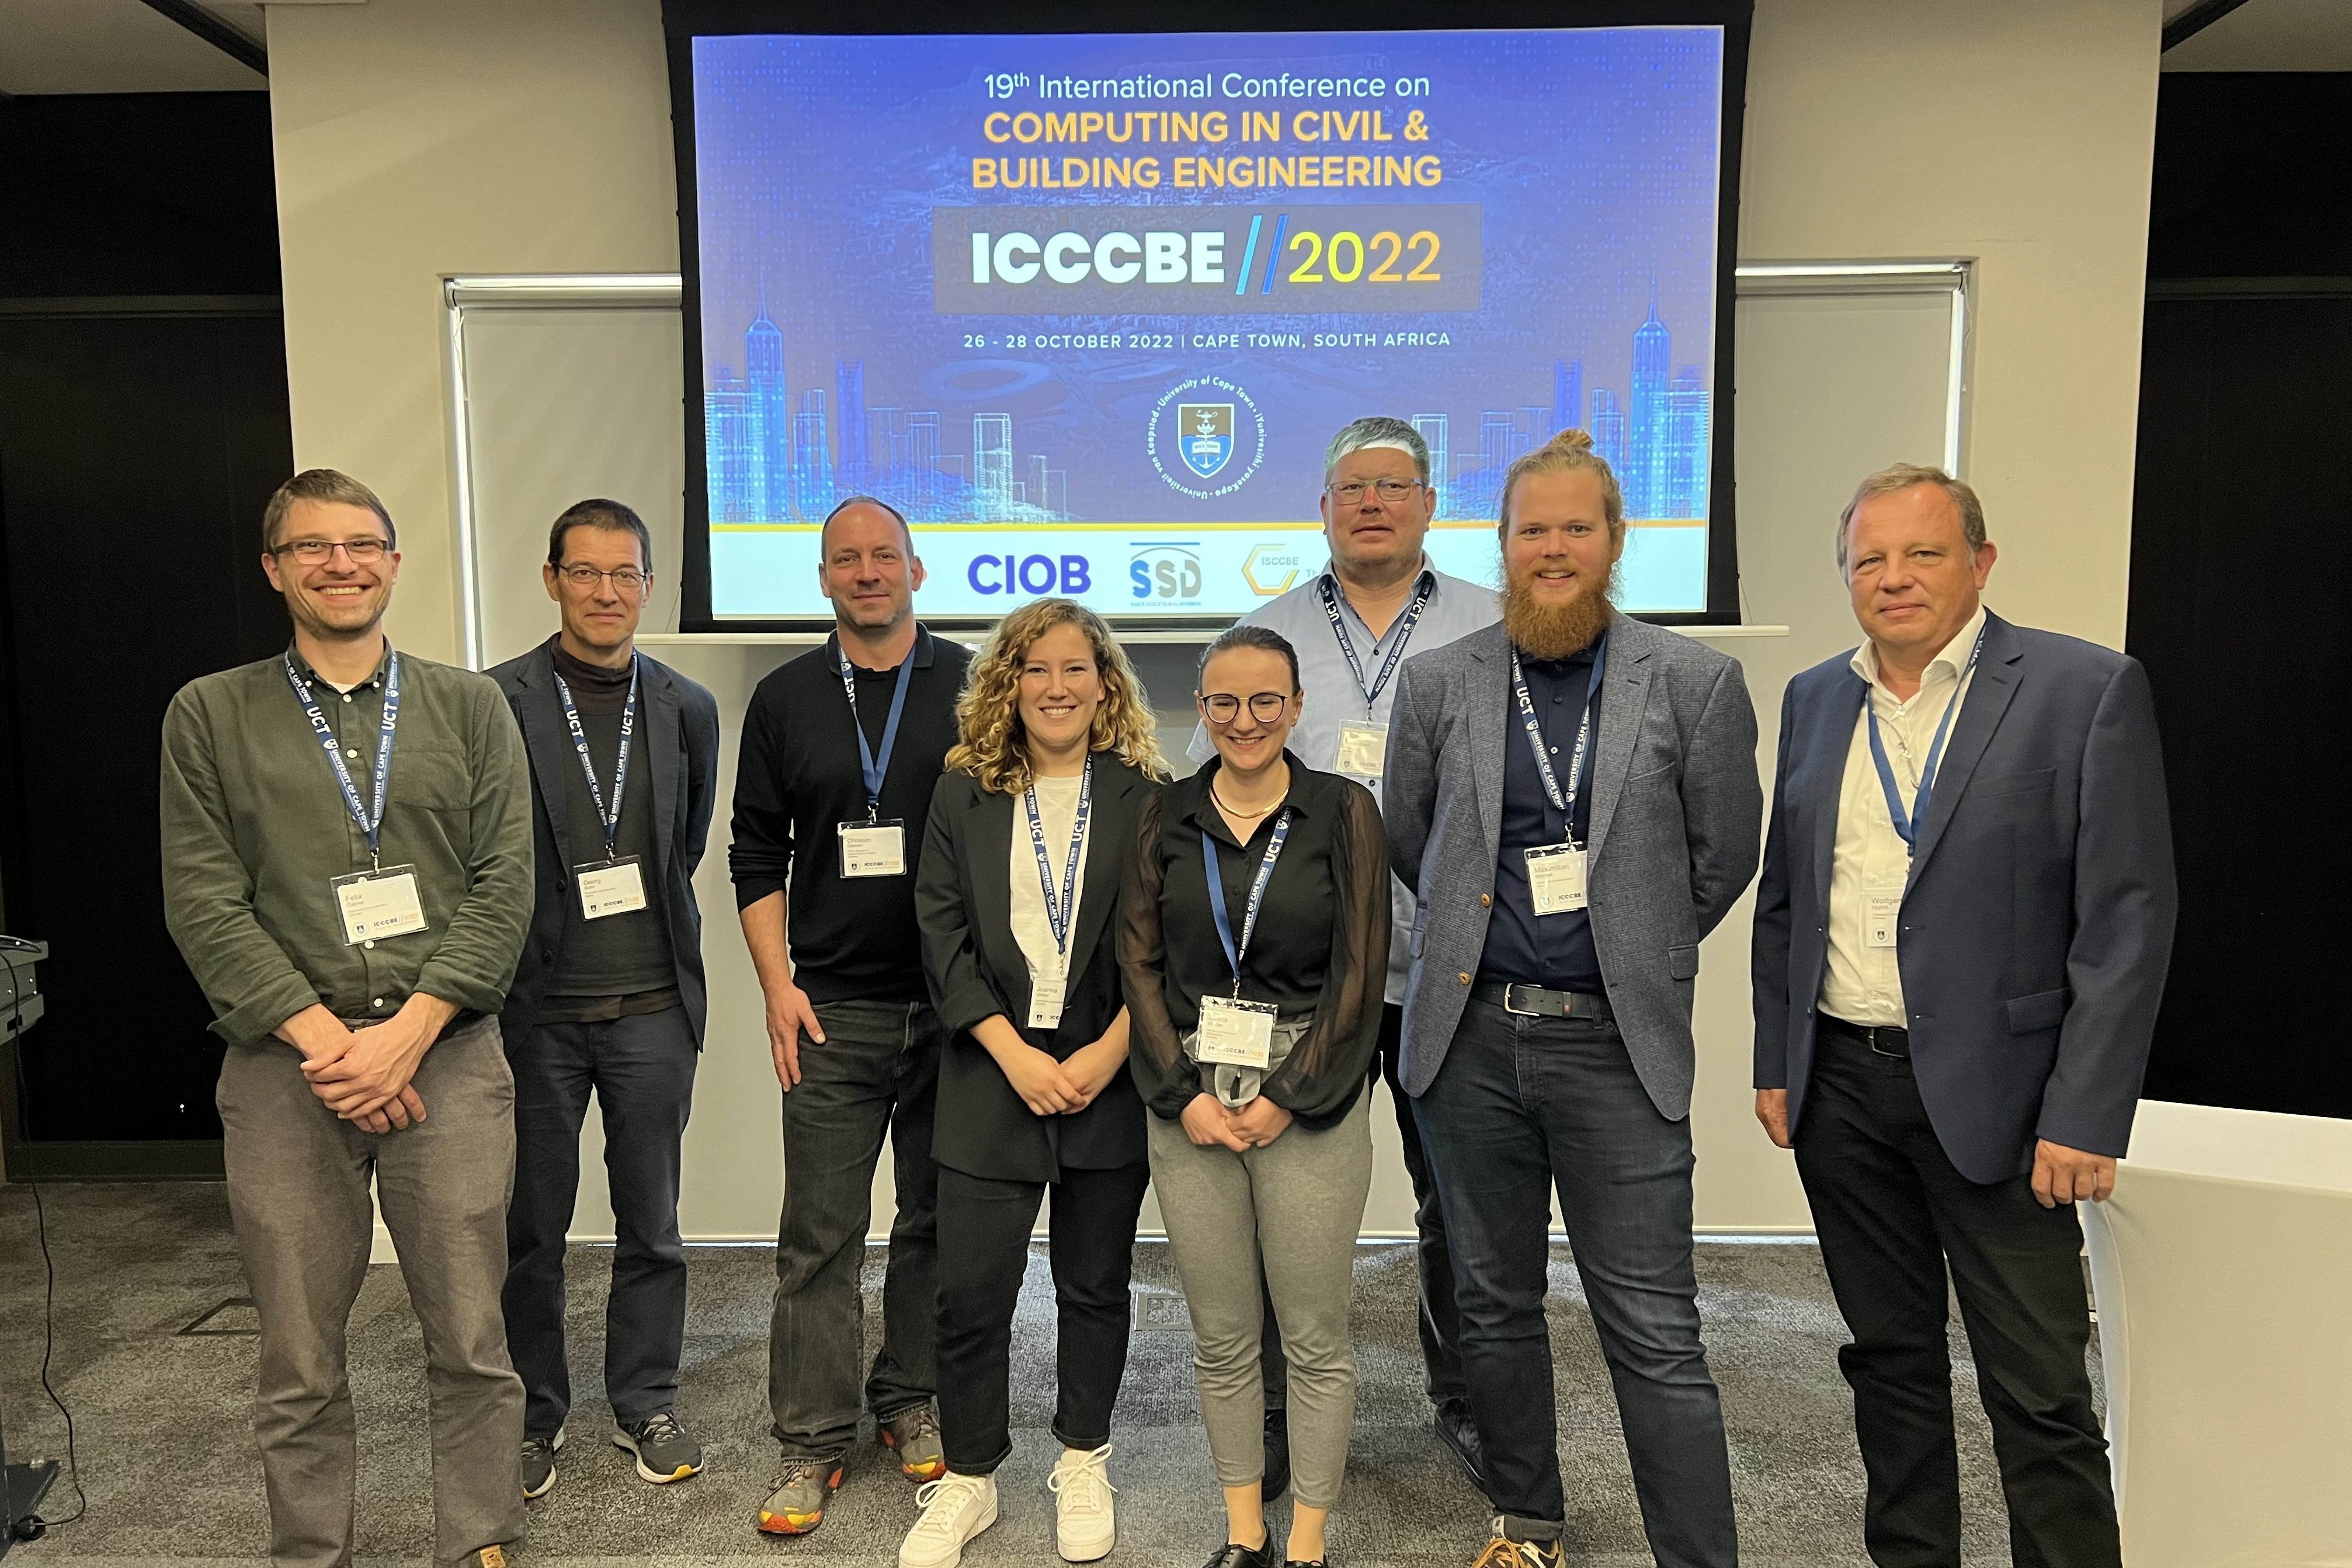 International Conference on Computing in Civil and Building Engineering (ICCCBE) 2022